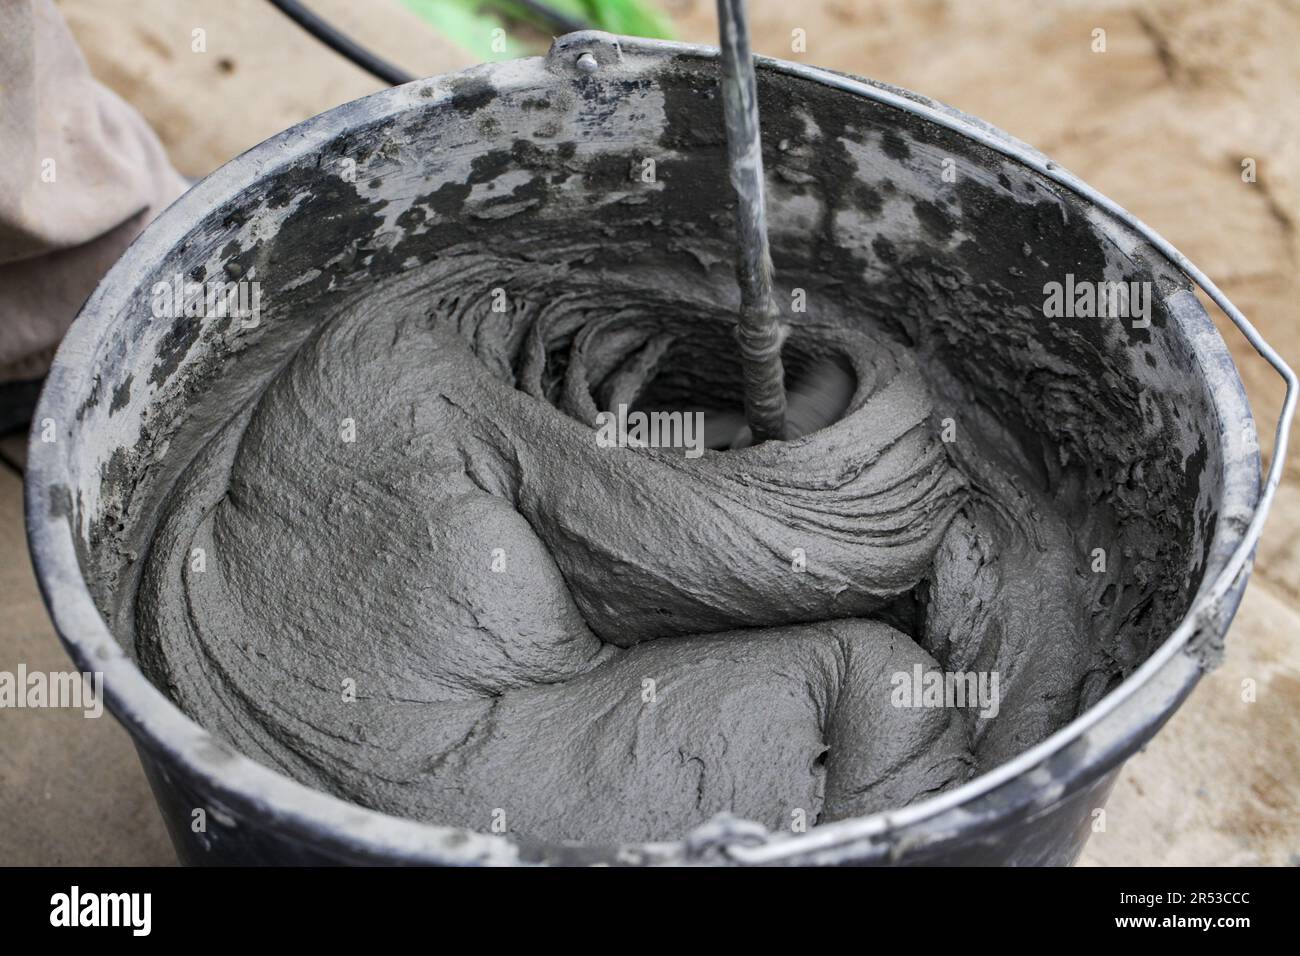 Cement based adhesive. Mixing concrete with an electric drill and mixer. Wet mortar for finishing works in construction. Stock Photo